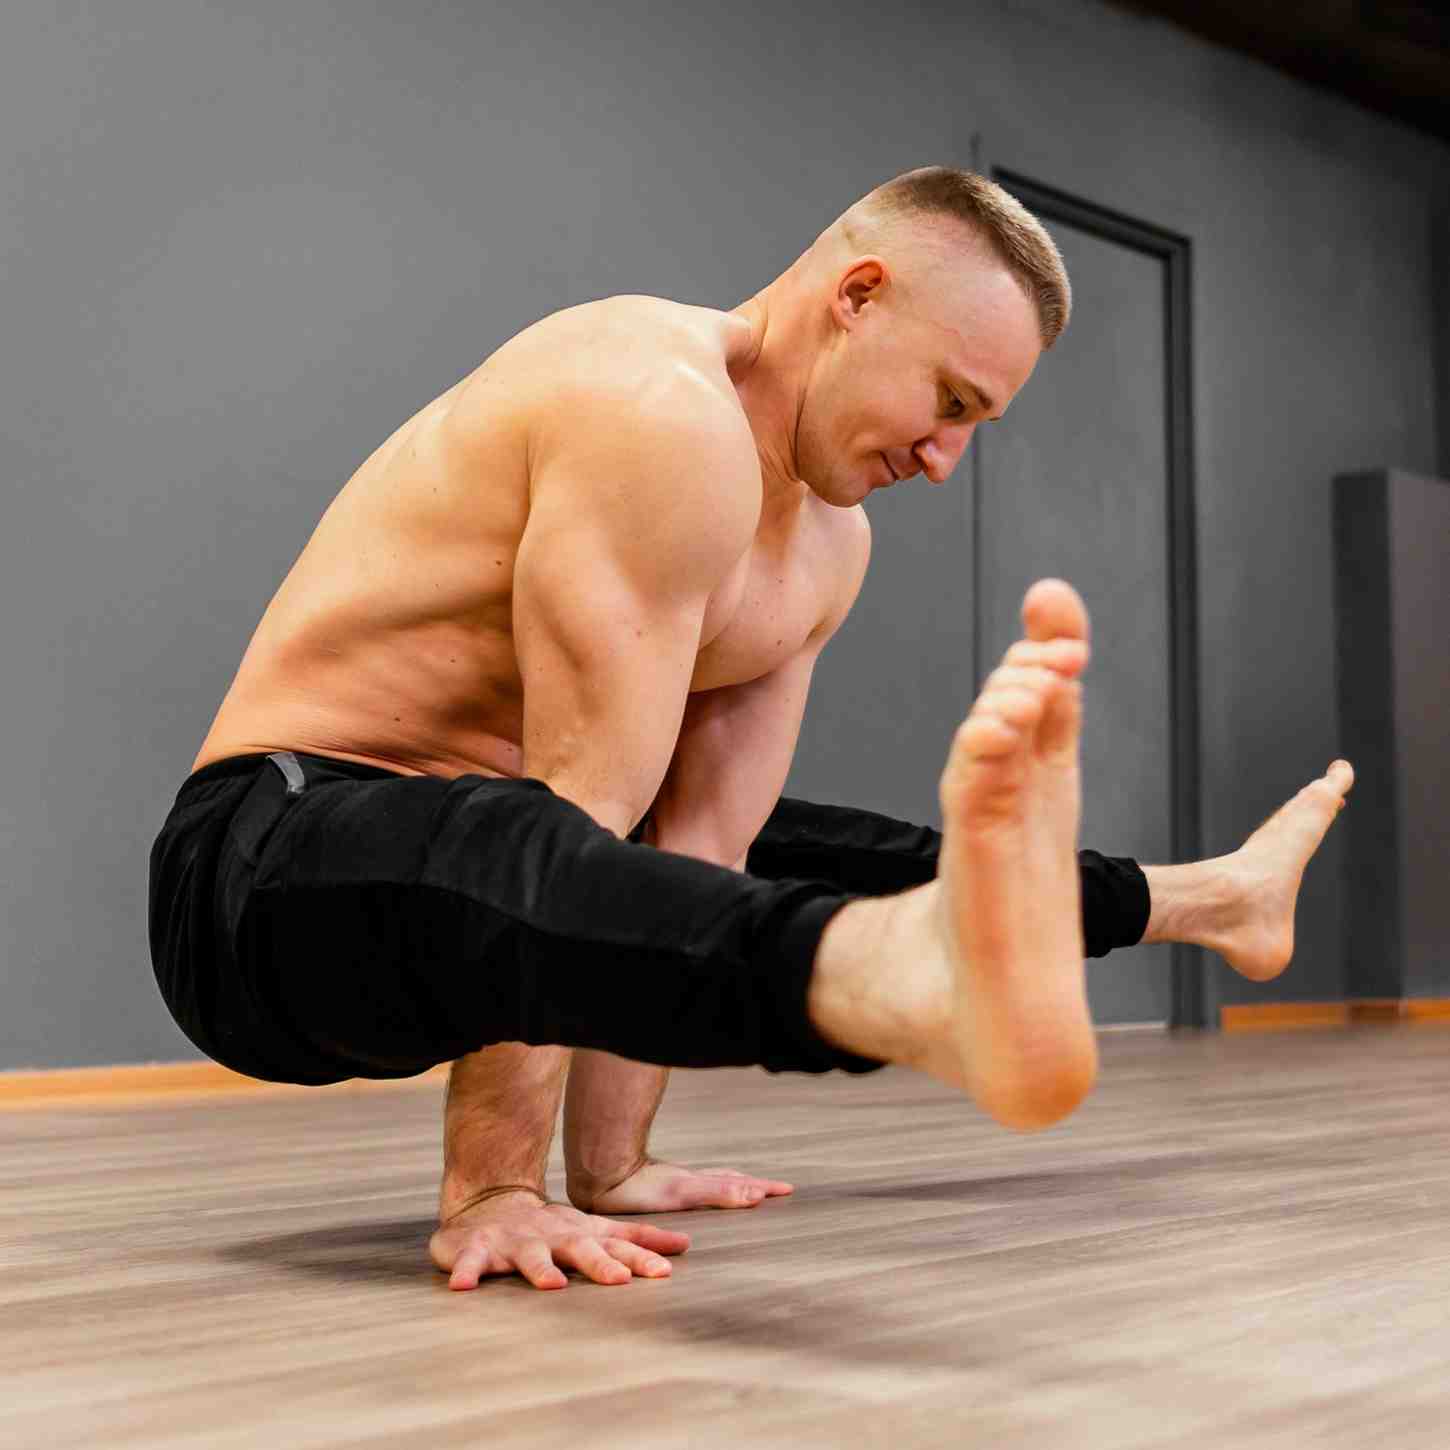 Muscle Building in Yoga